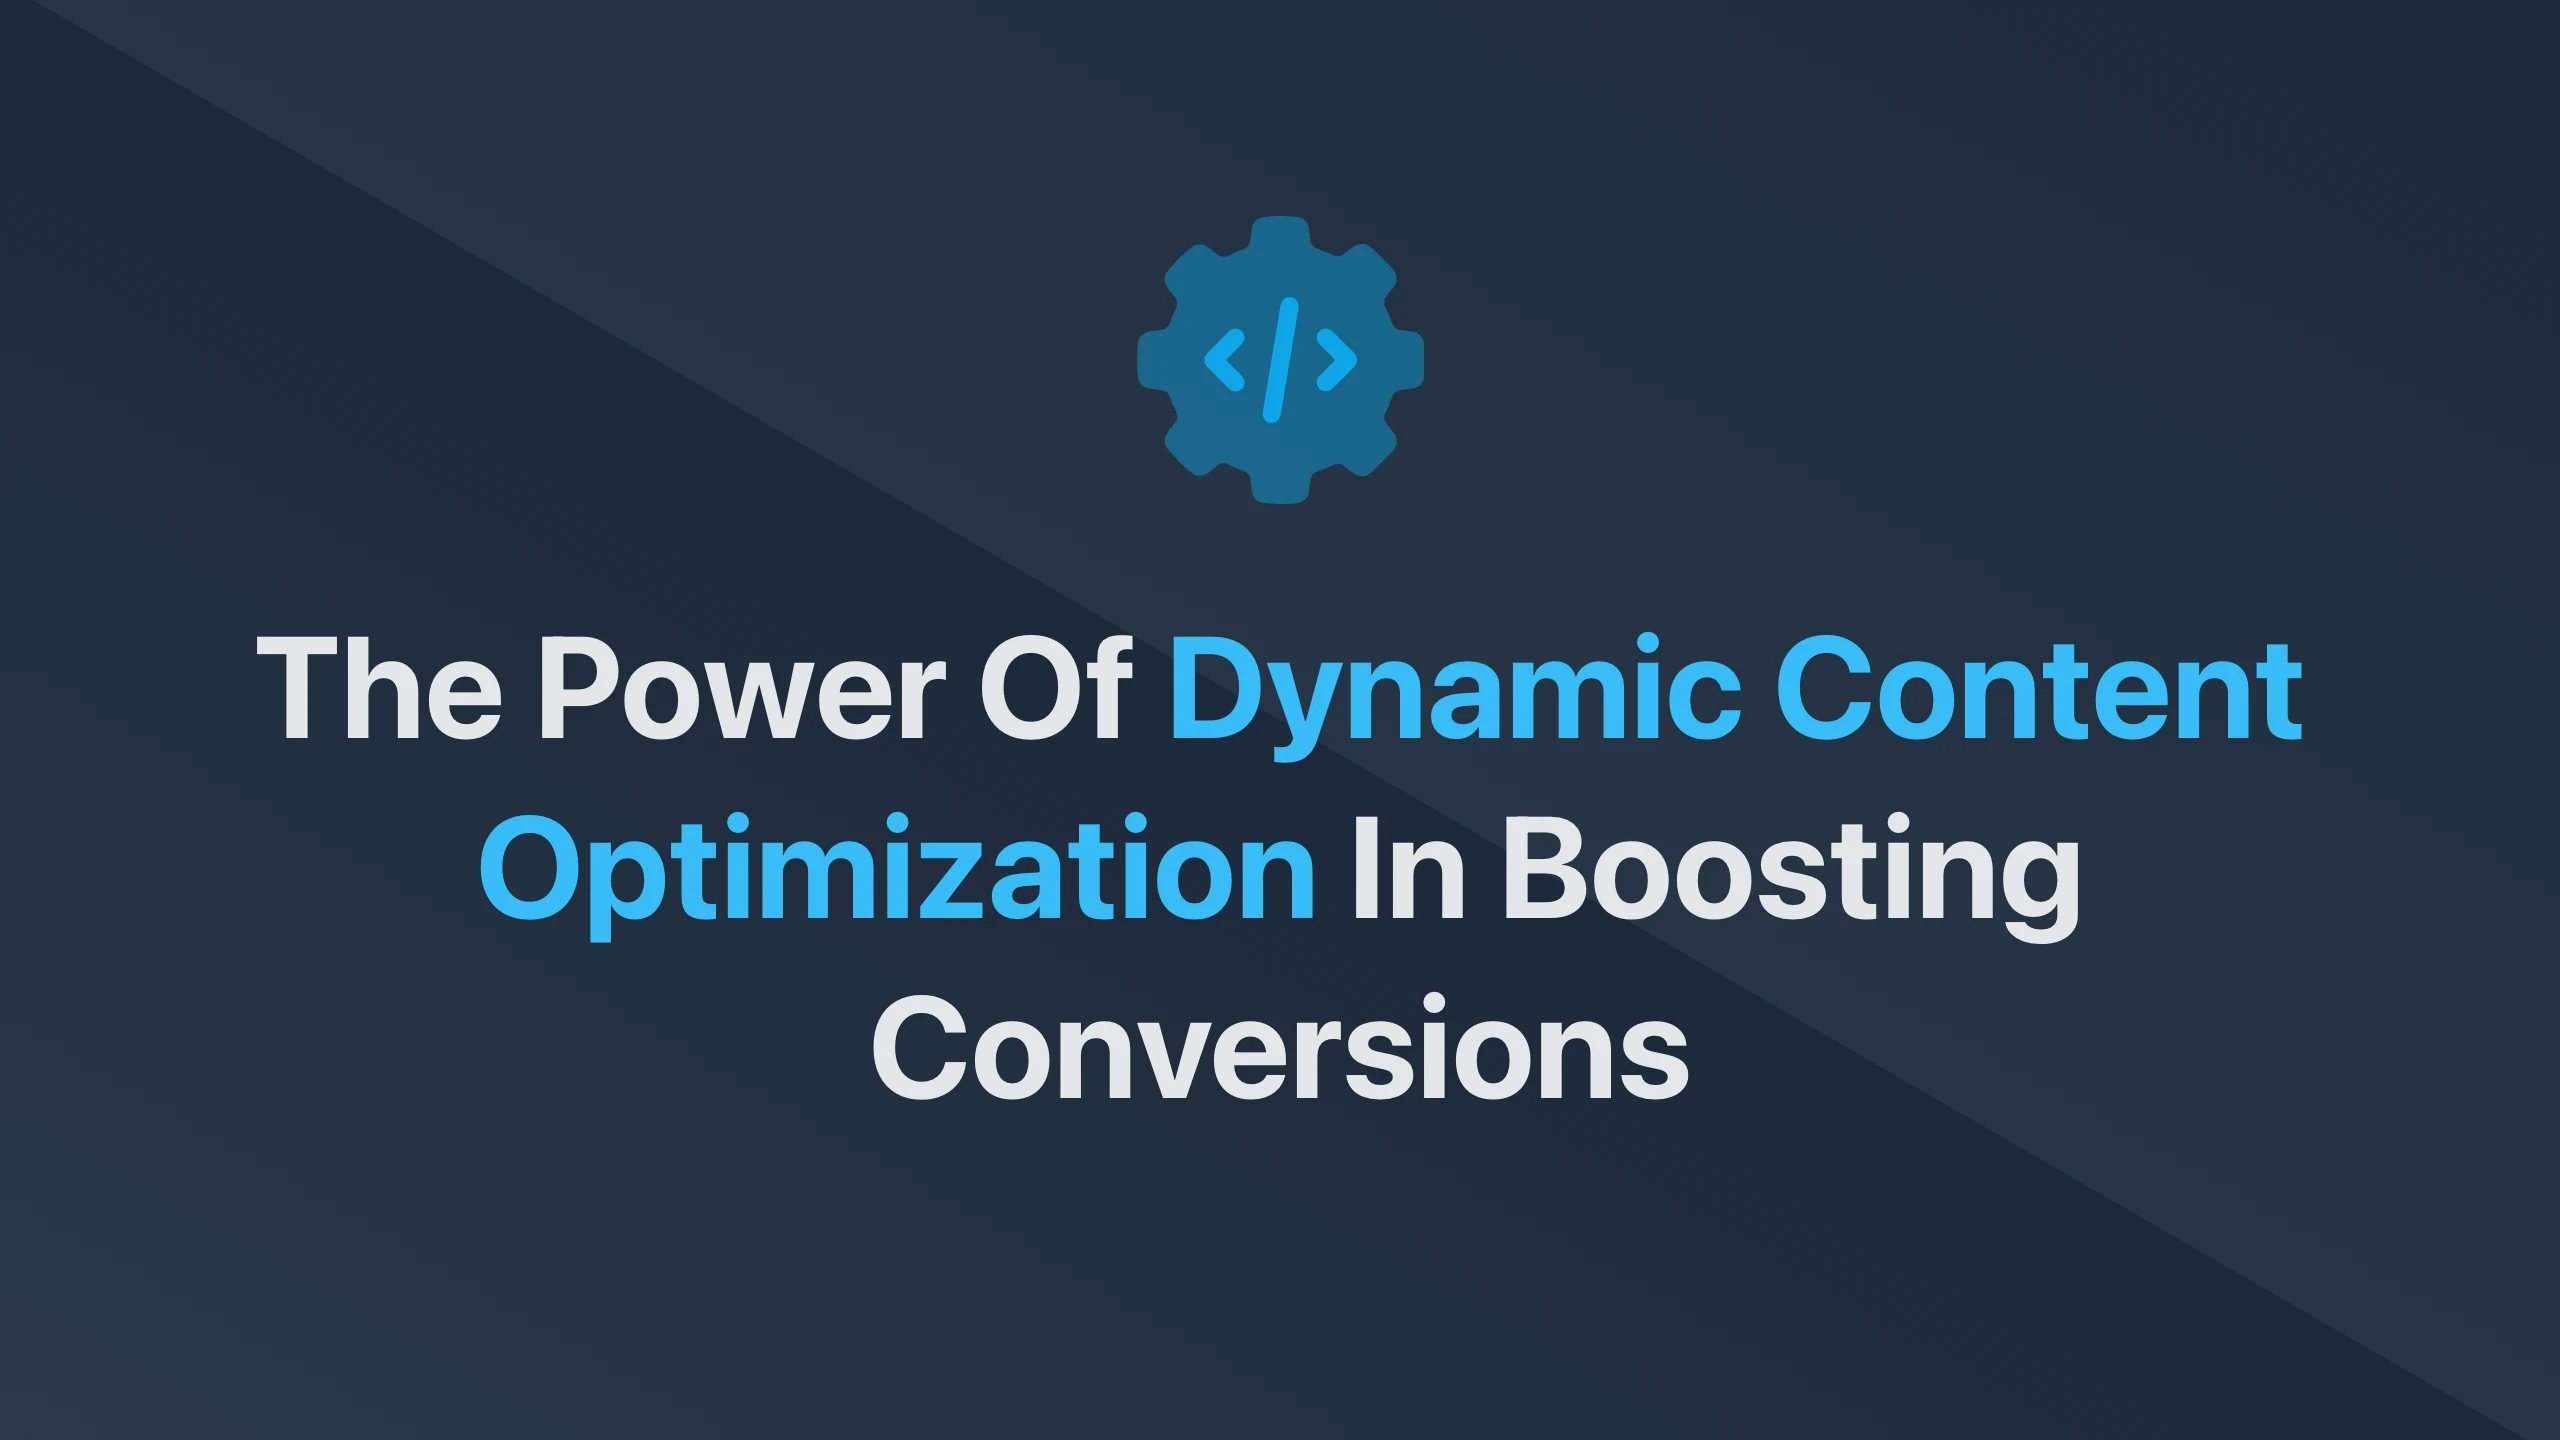 Cover Image for The Power of Dynamic Content Optimization in Boosting Conversions